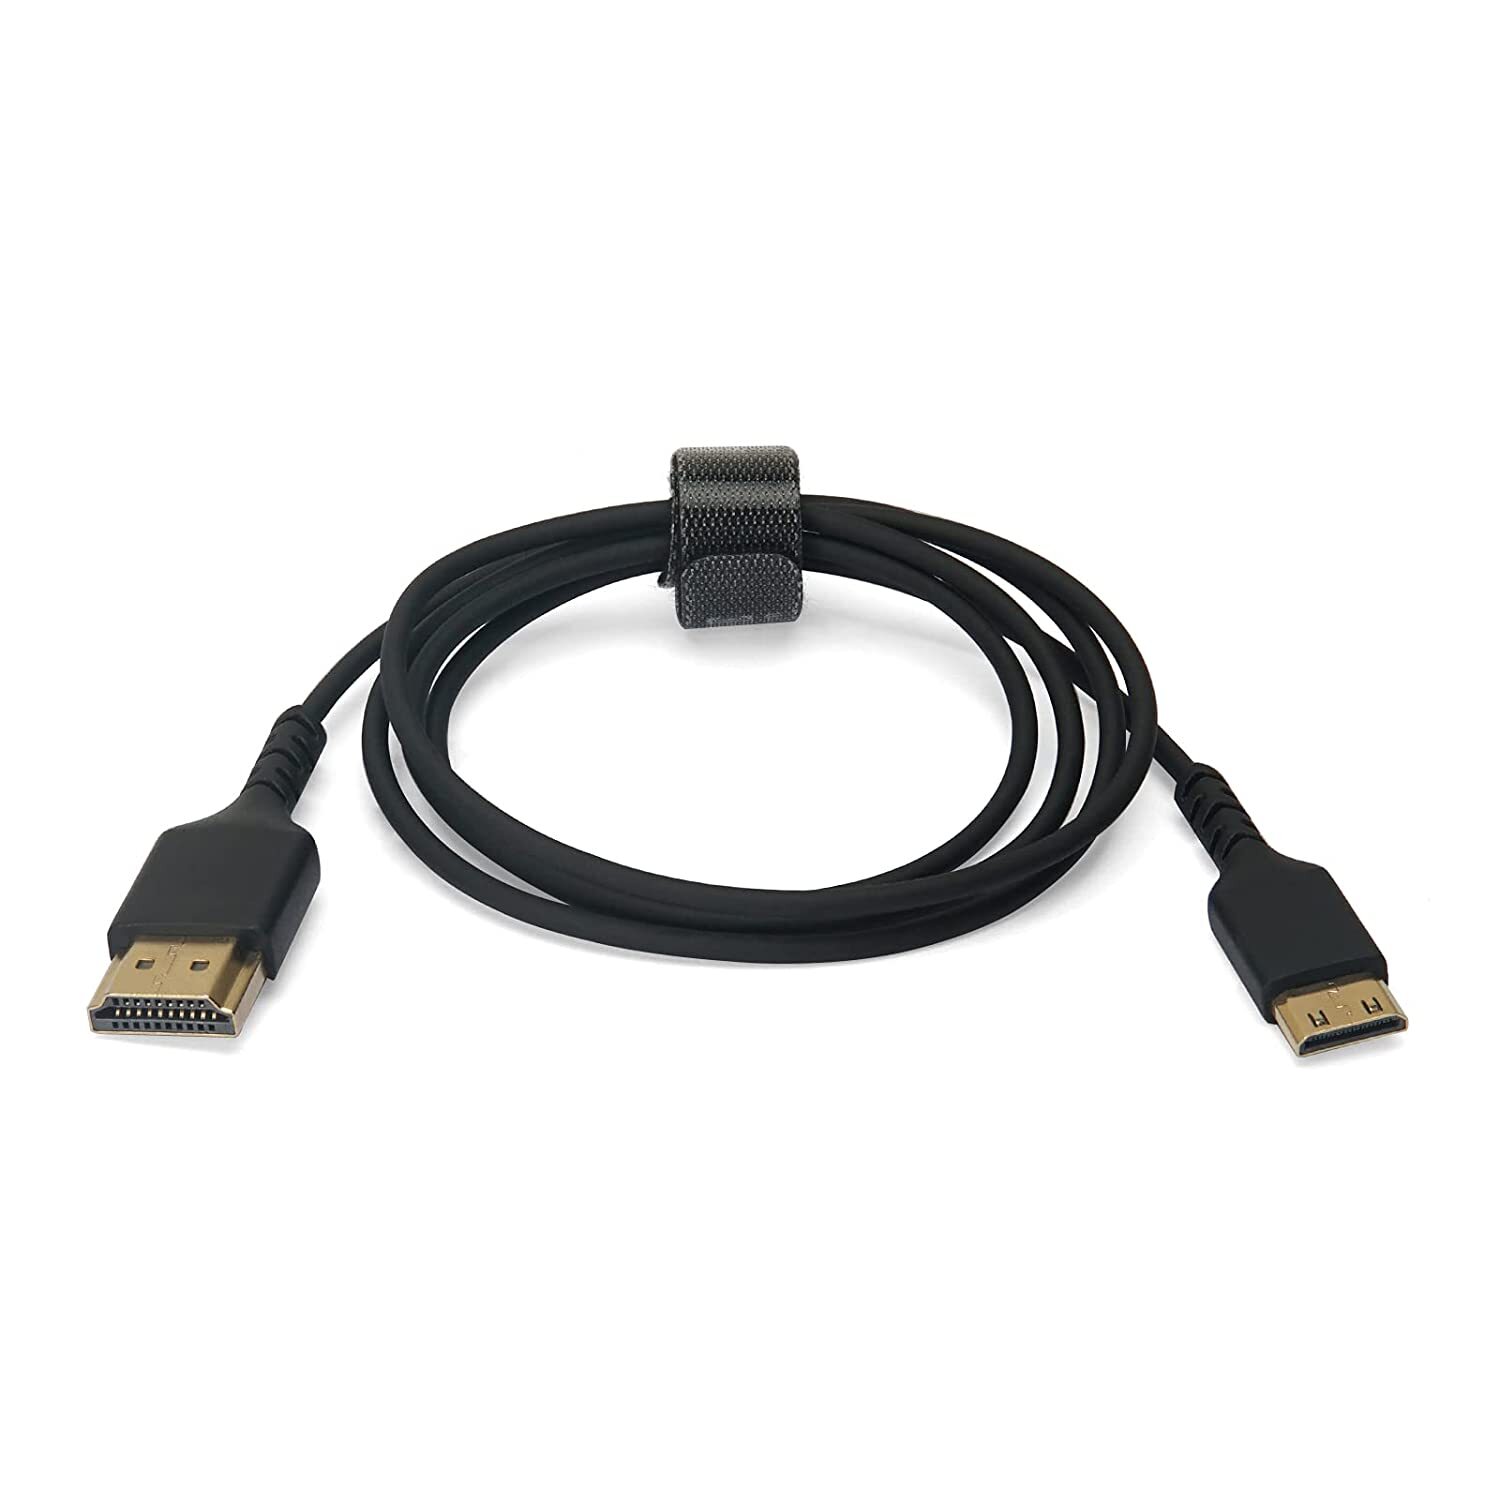  Anbear Mini HDMI to HDMI Adapter, Mini HDMI to HDMI Cable 4K×2K  for DSLR Camera,Laptop, Camcorder, Tablet and Graphics Video Card :  Electronics